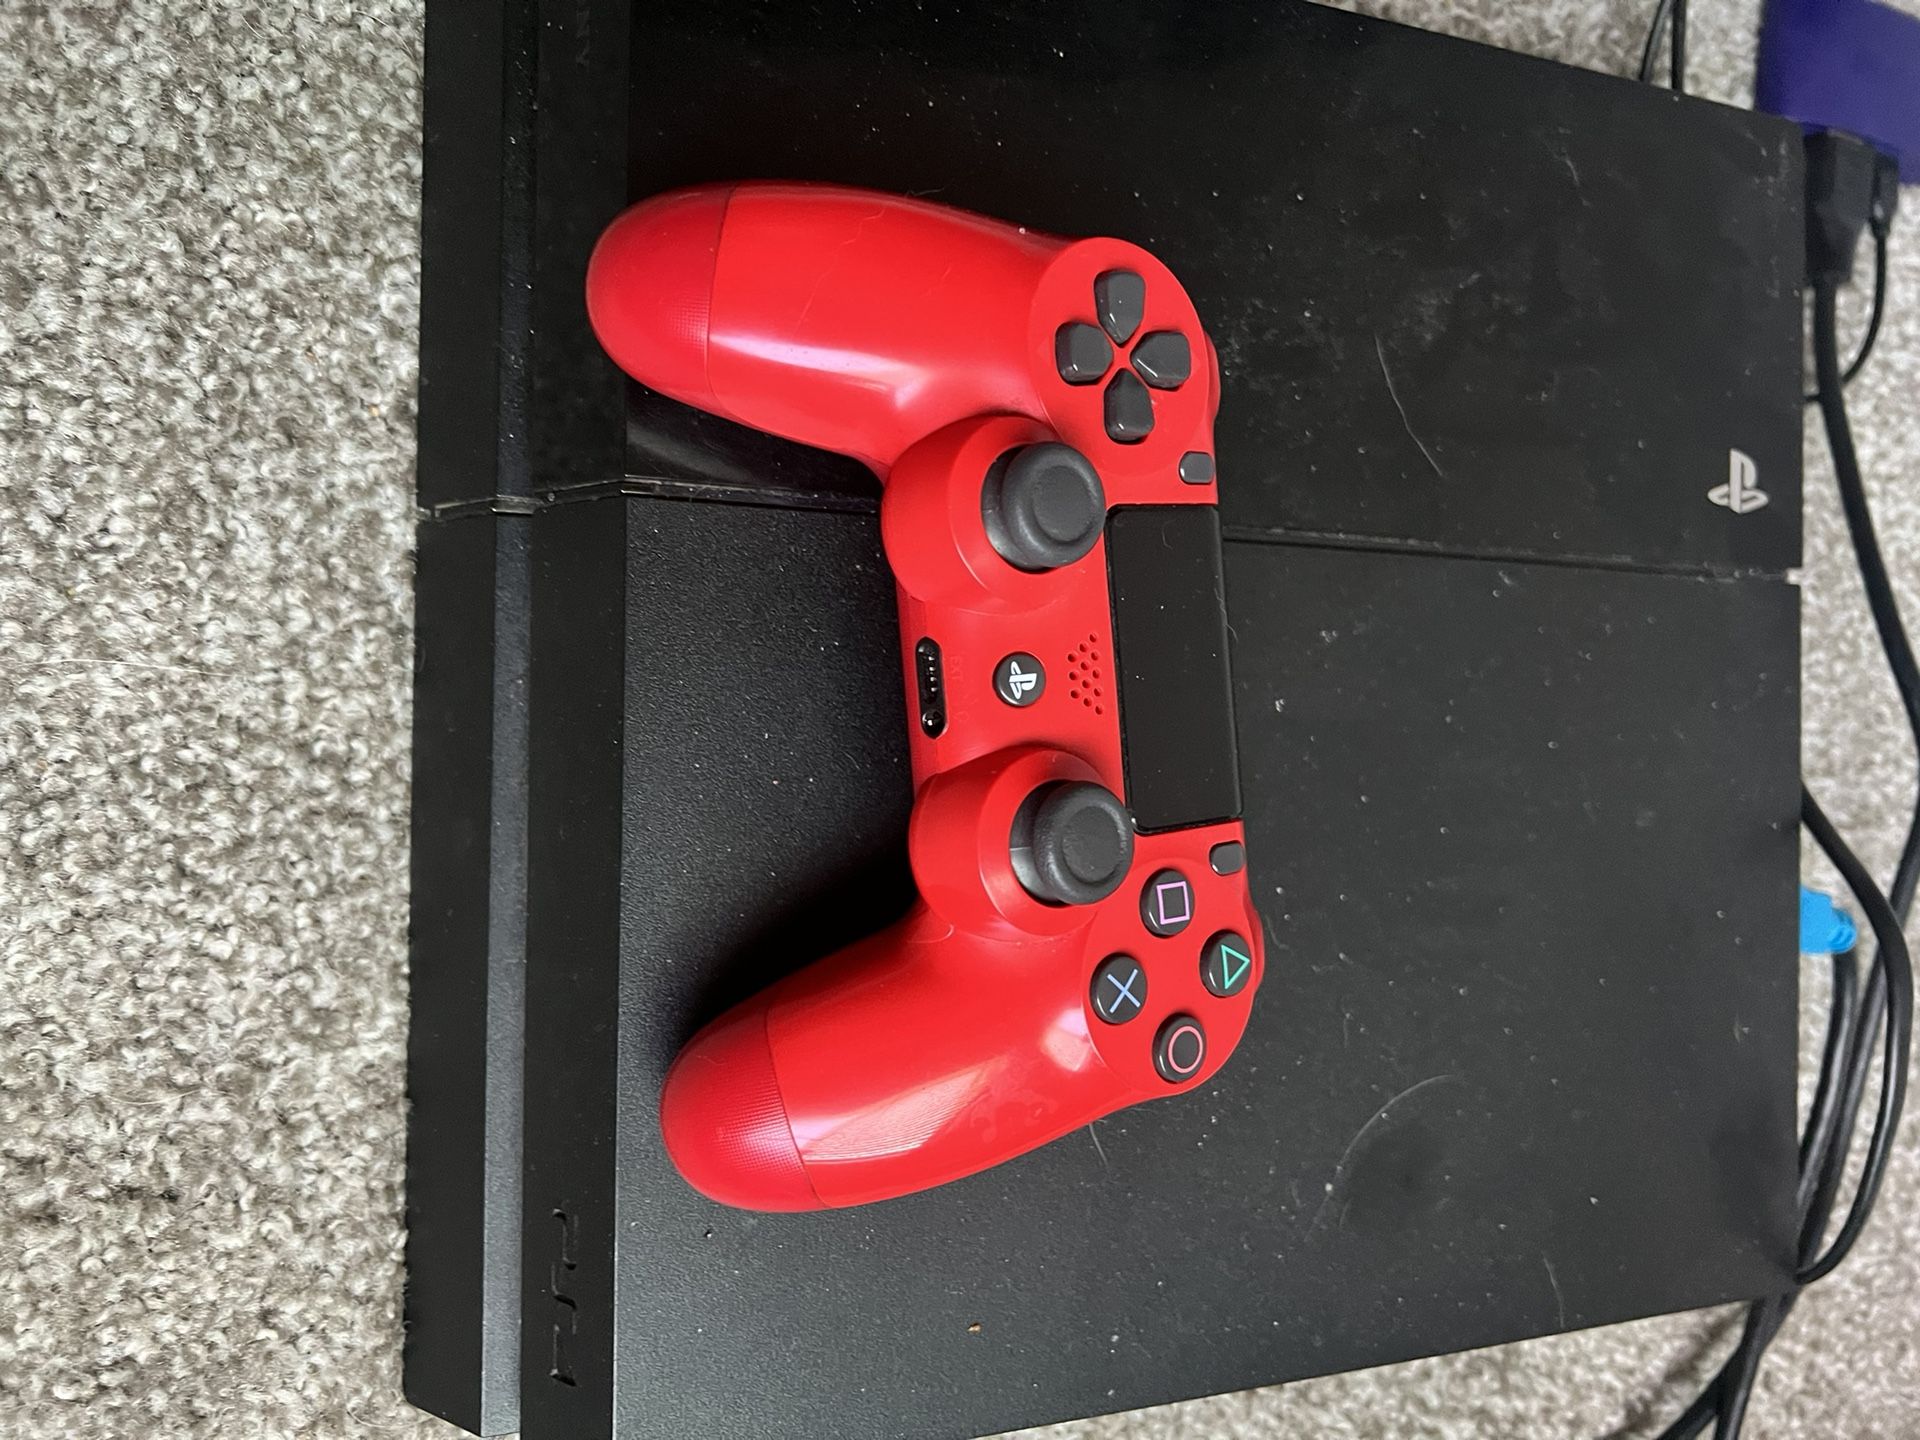 PS4 100$ TODAY ( Includes Controller And Cords )